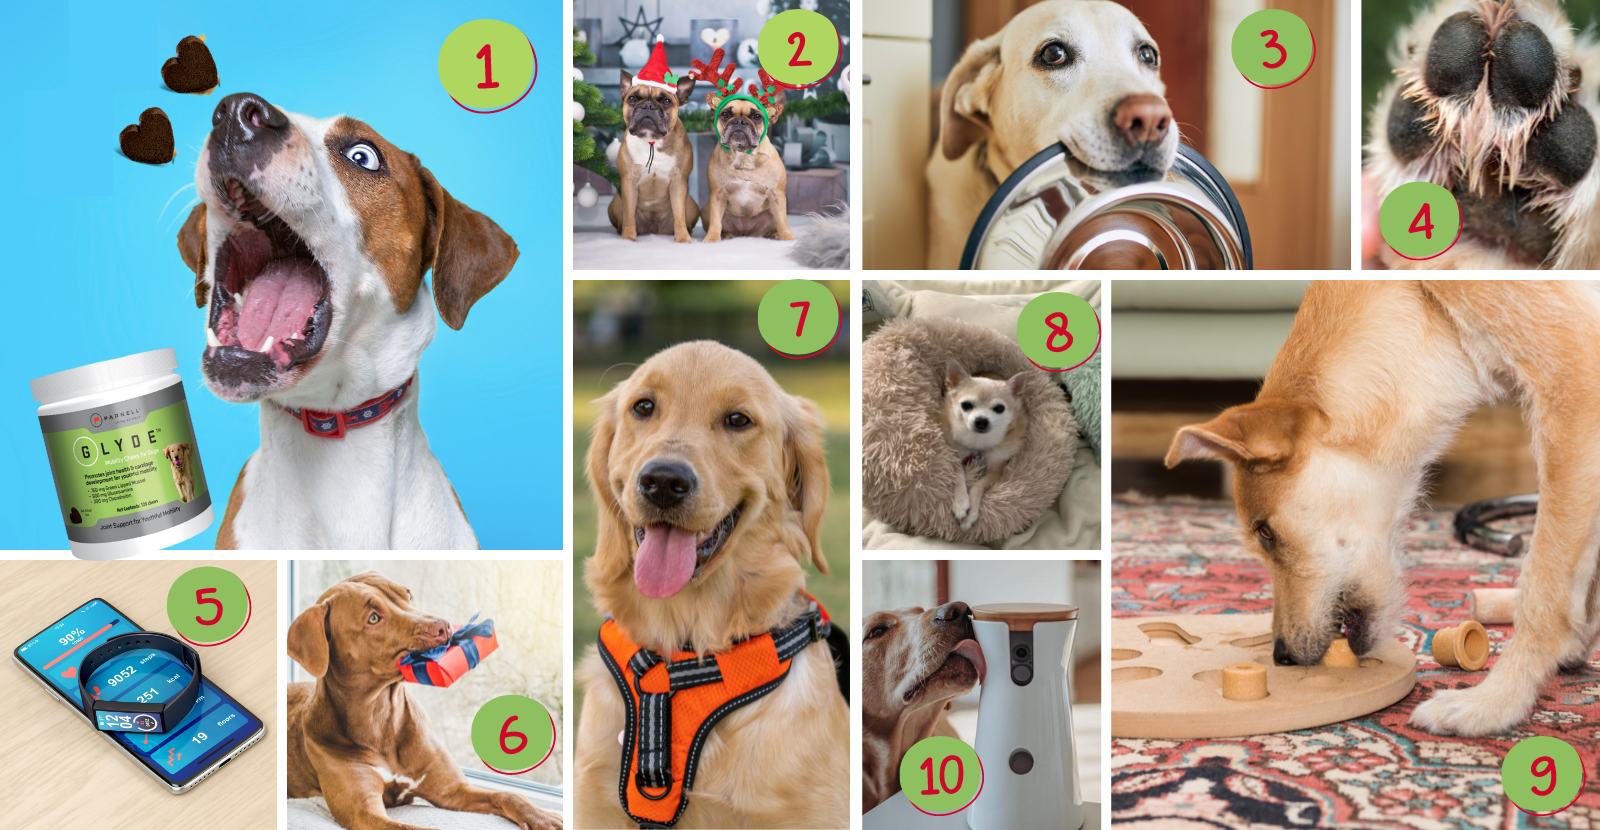 Top 10 Christmas Gifts for Dogs